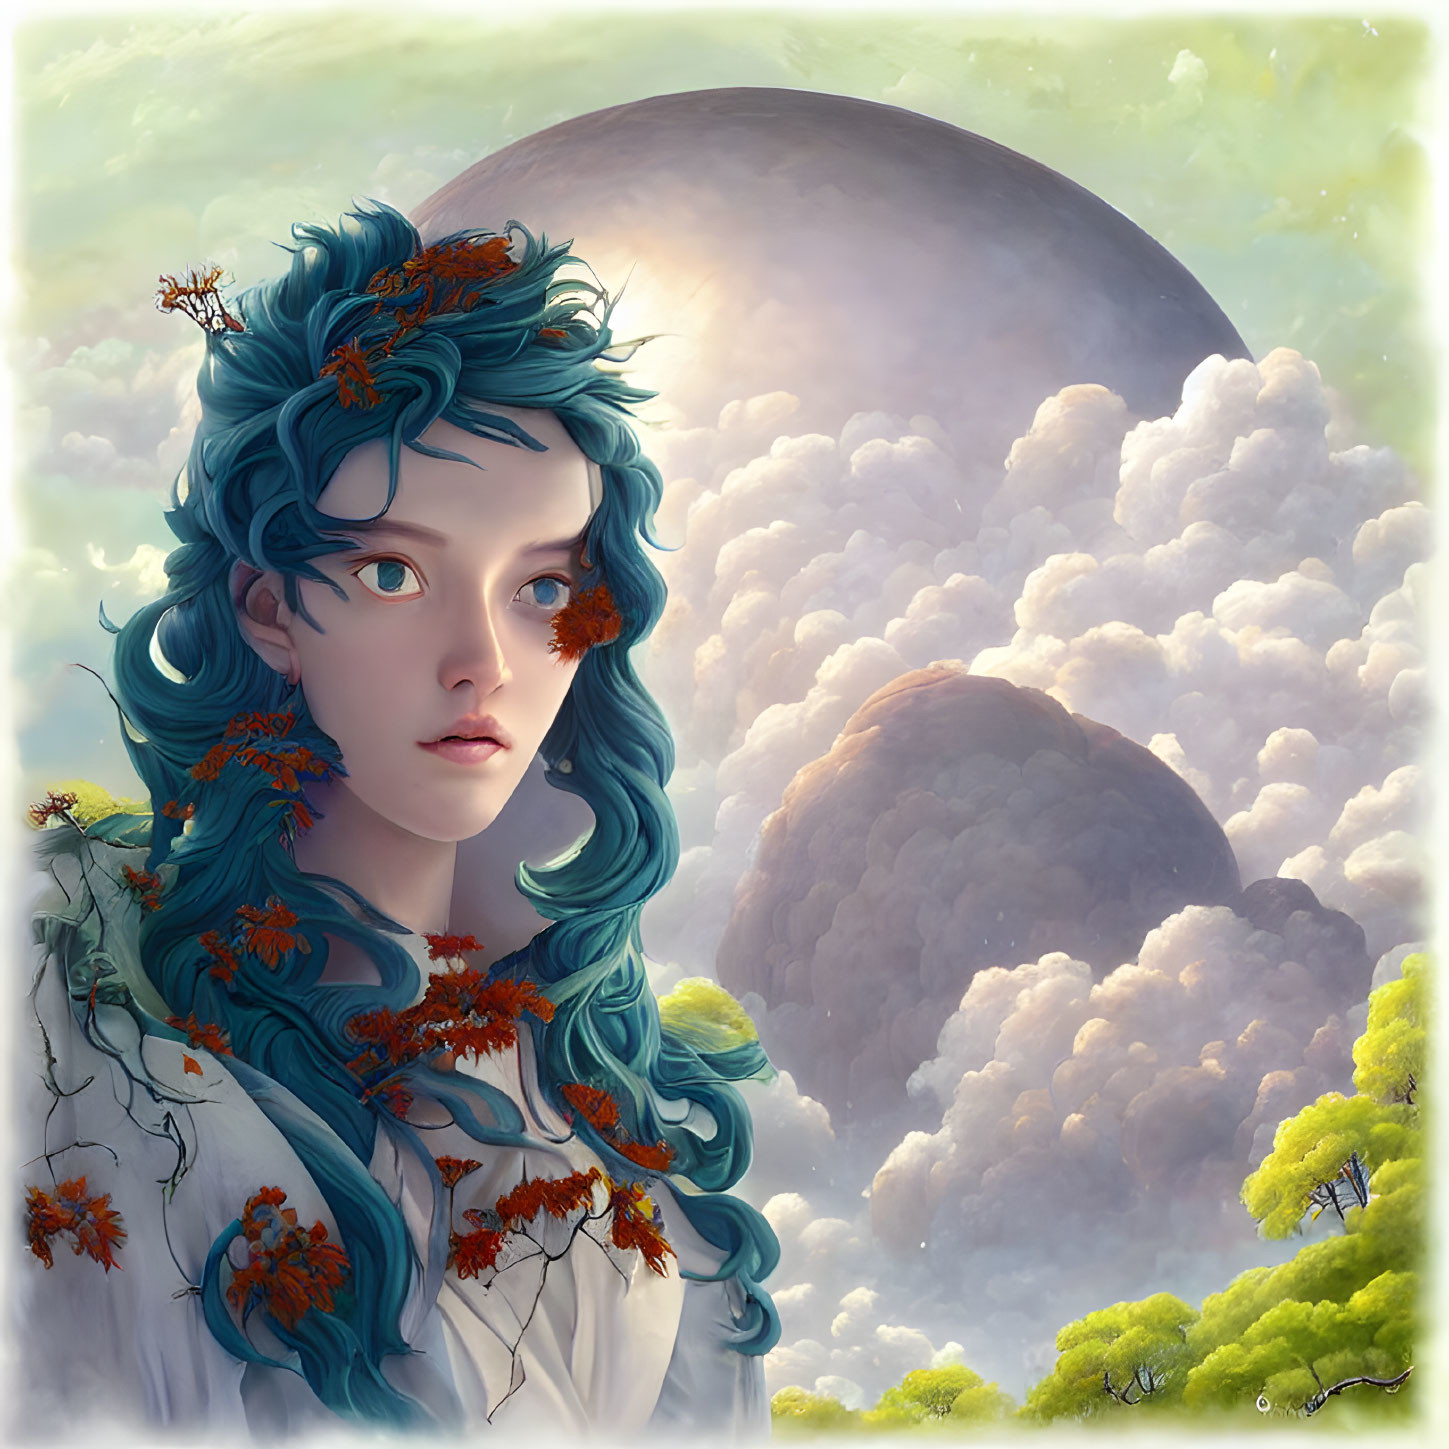 Fantastical portrait: Woman with blue hair, orange flowers, clouds, and planet